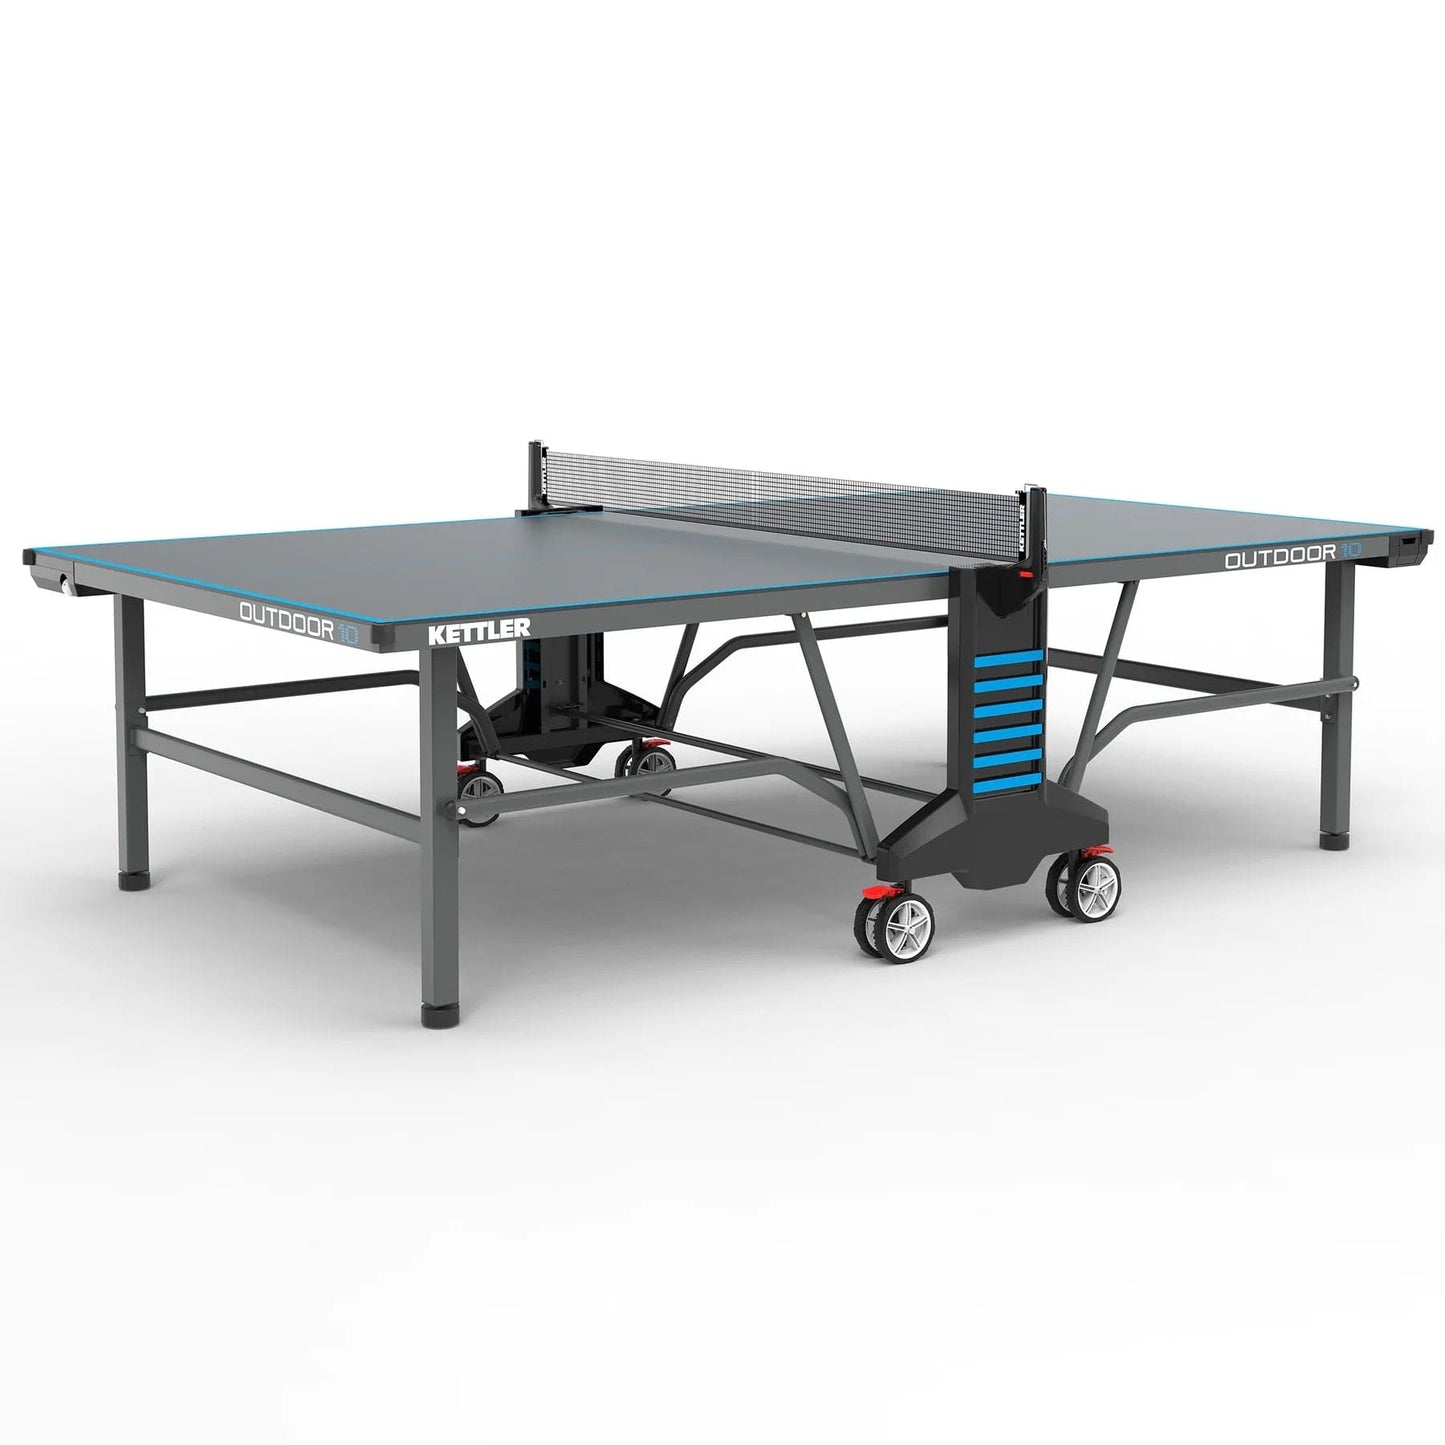 Outdoor Table Tennis by KETTLER® 